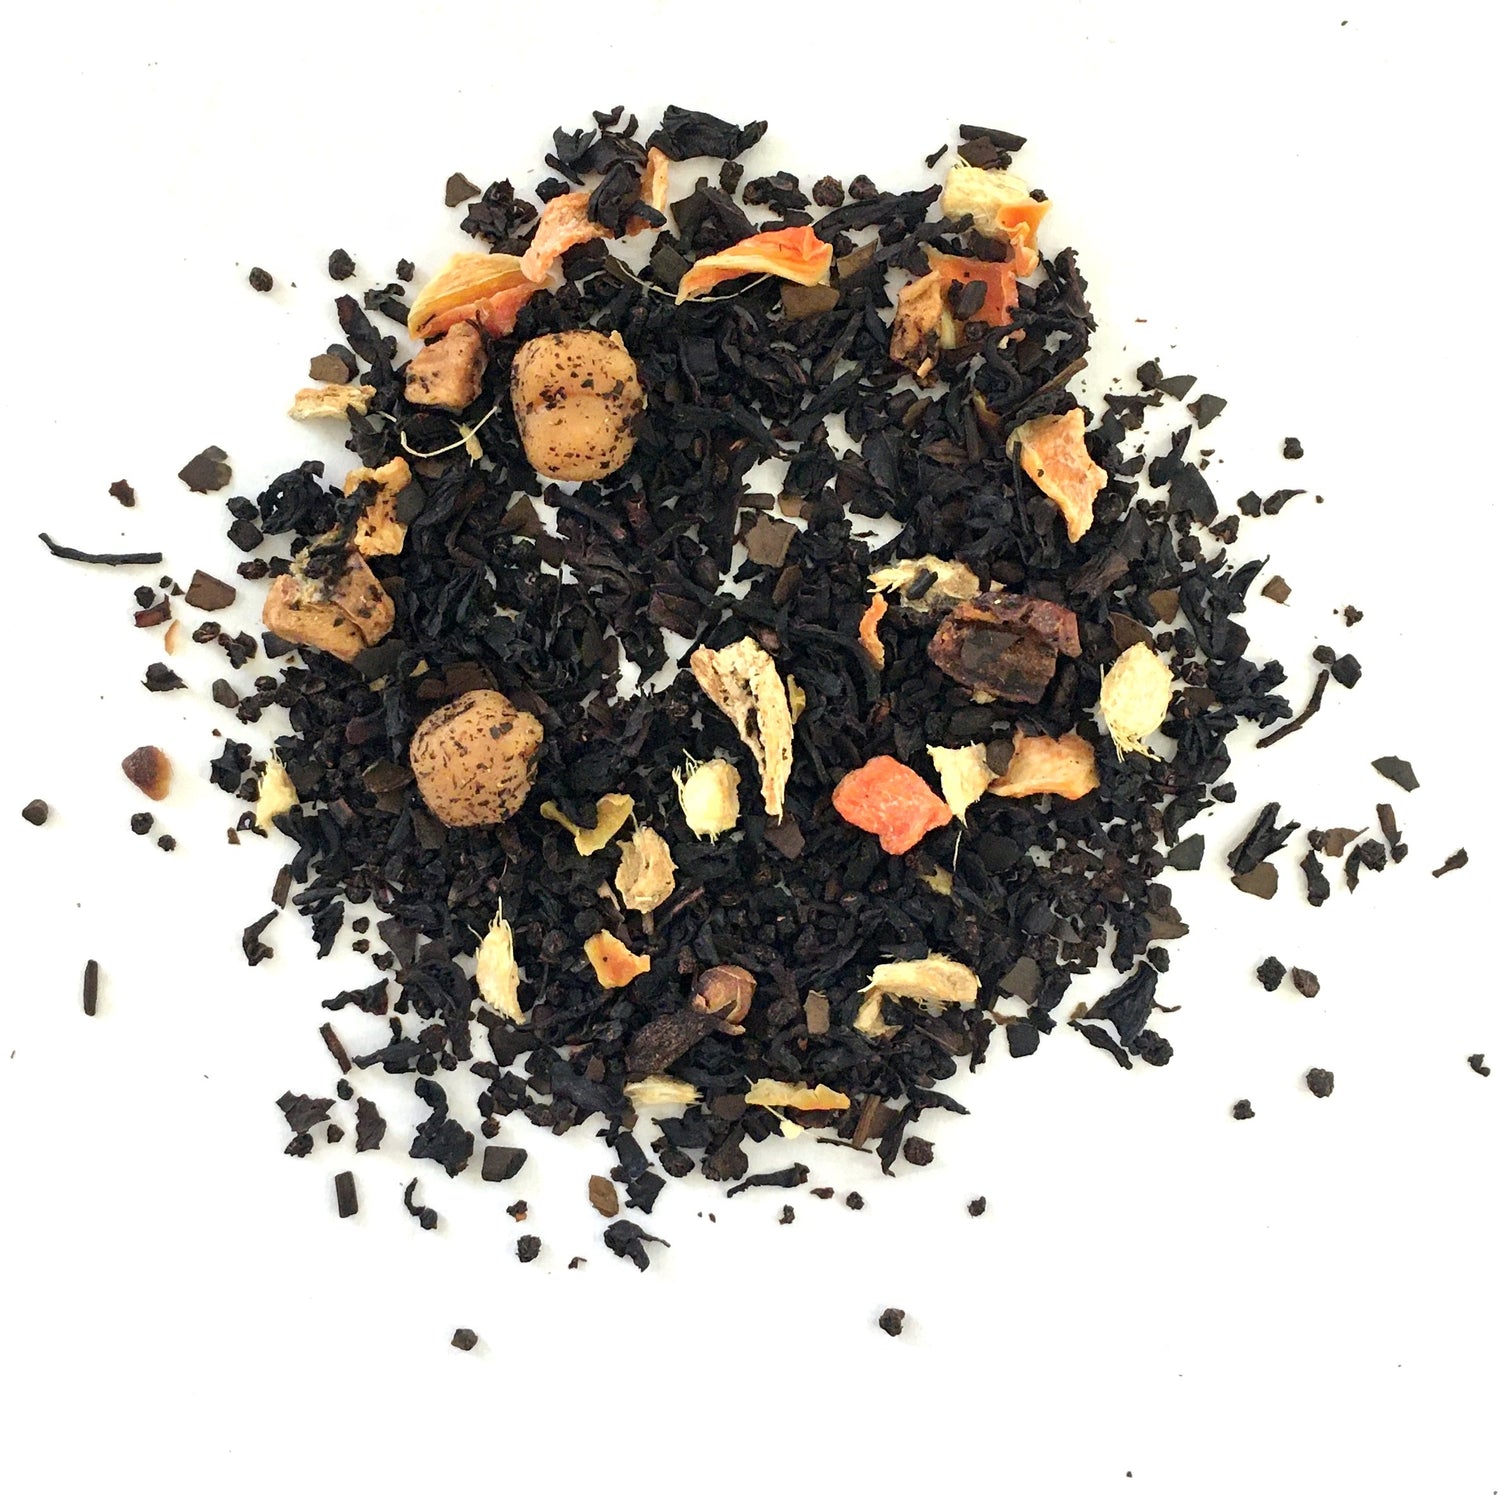 Black tea with apple, ginger, carrots, roasted mate, cloves, caramel and flavor